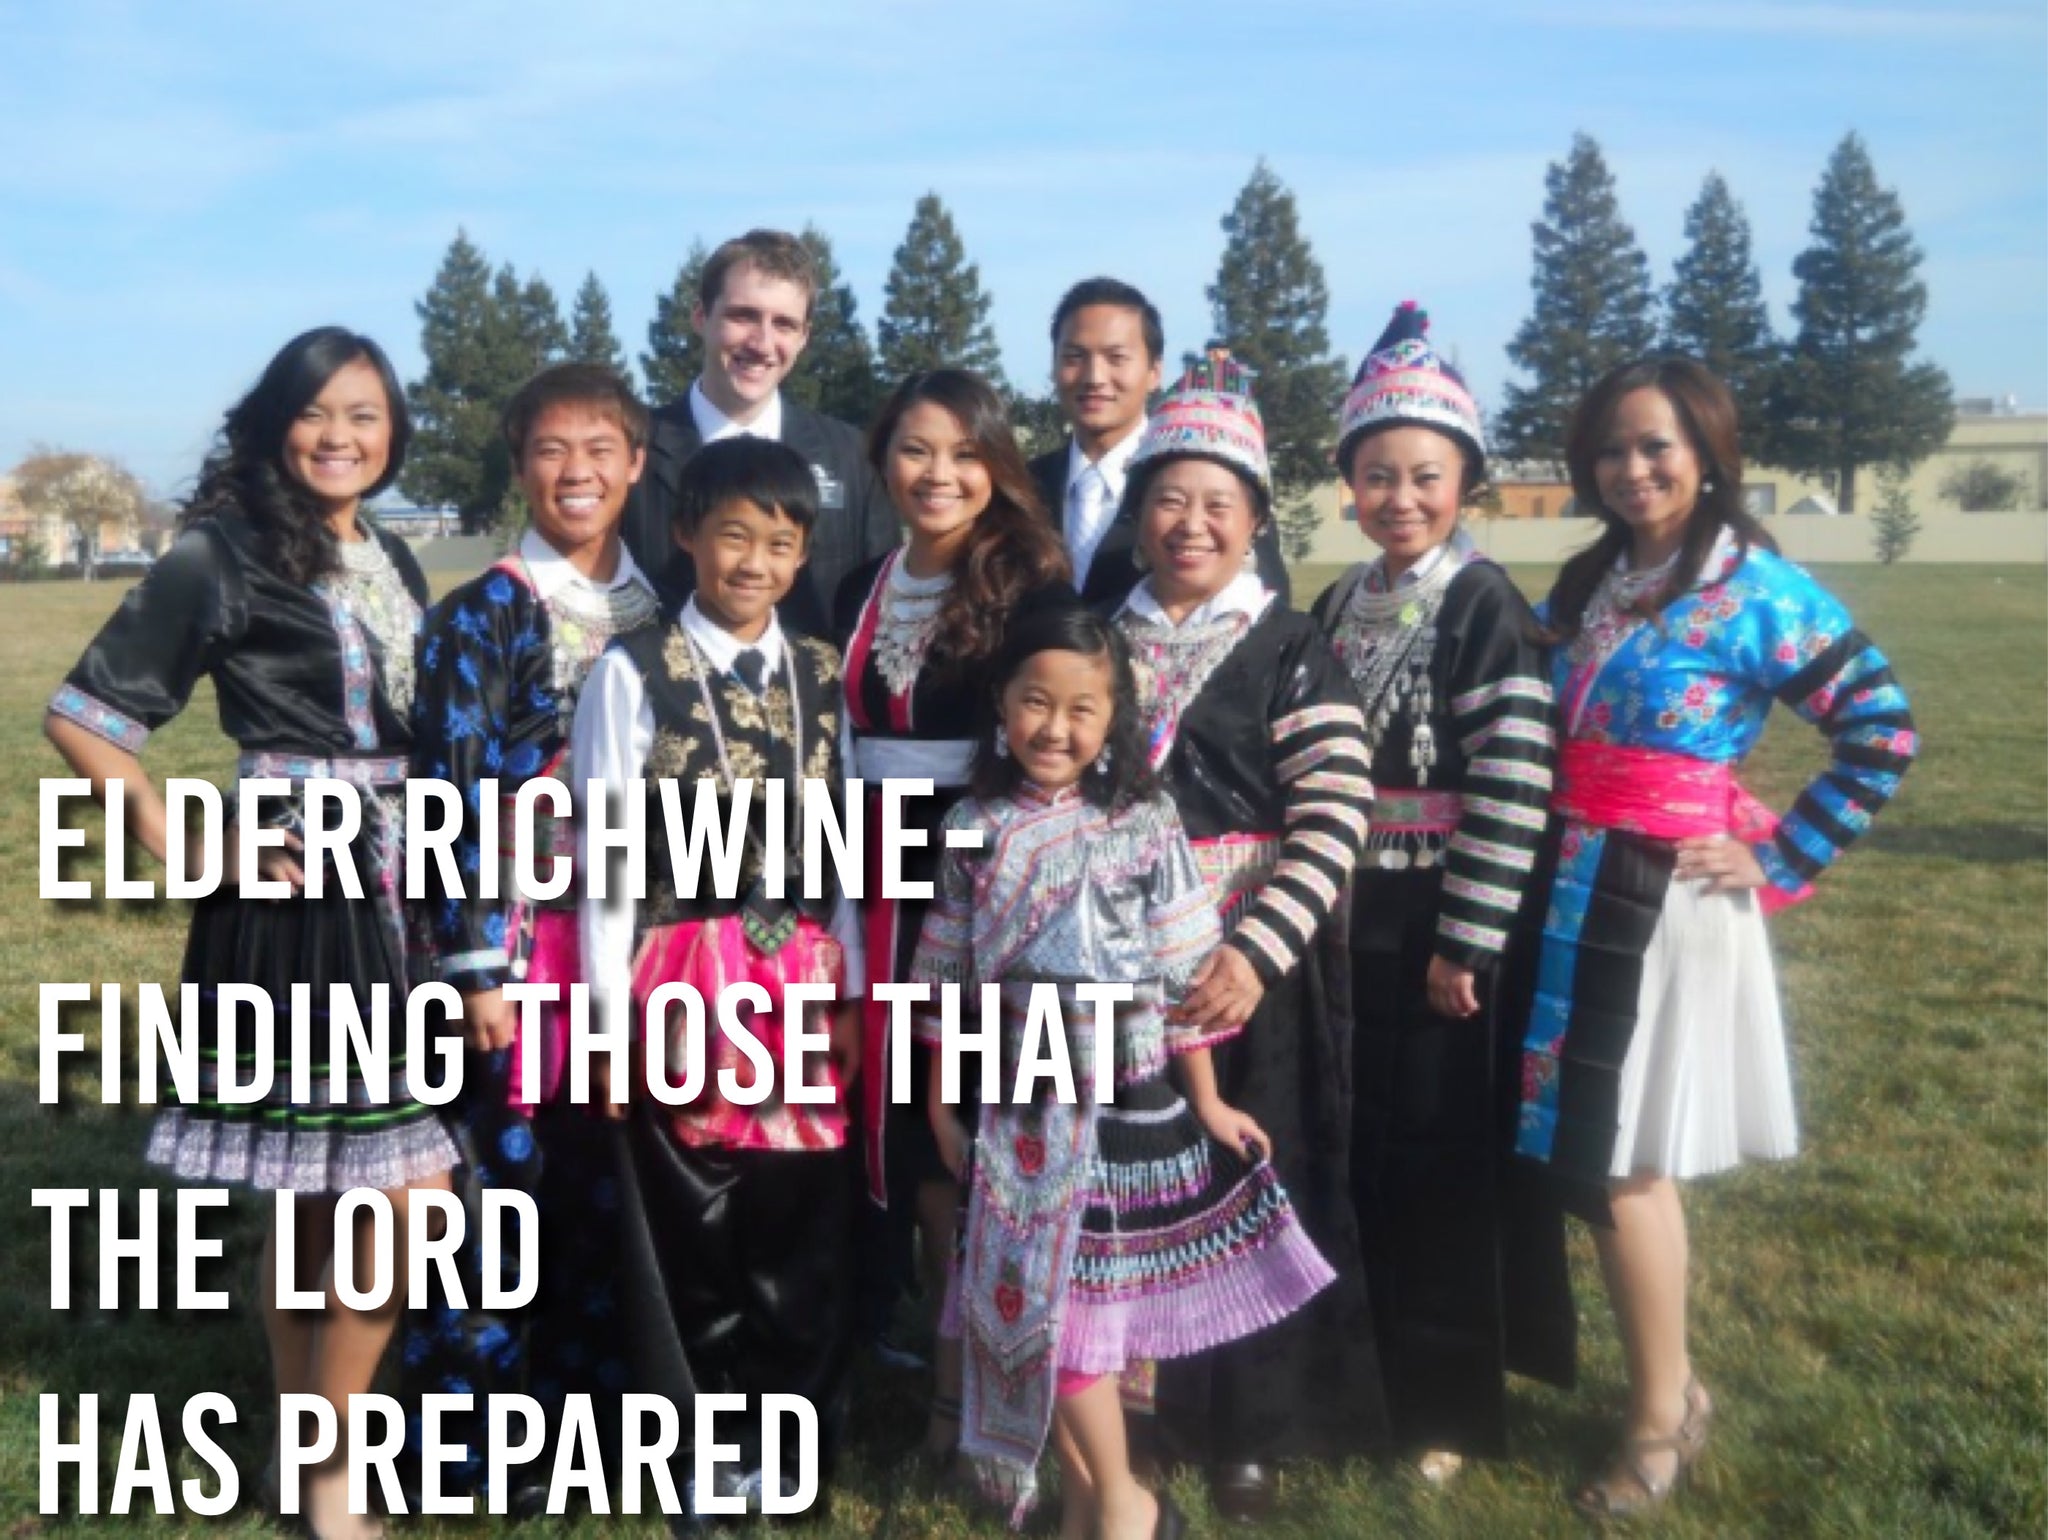 Elder Richwine- Finding Those that the Lord has Prepared